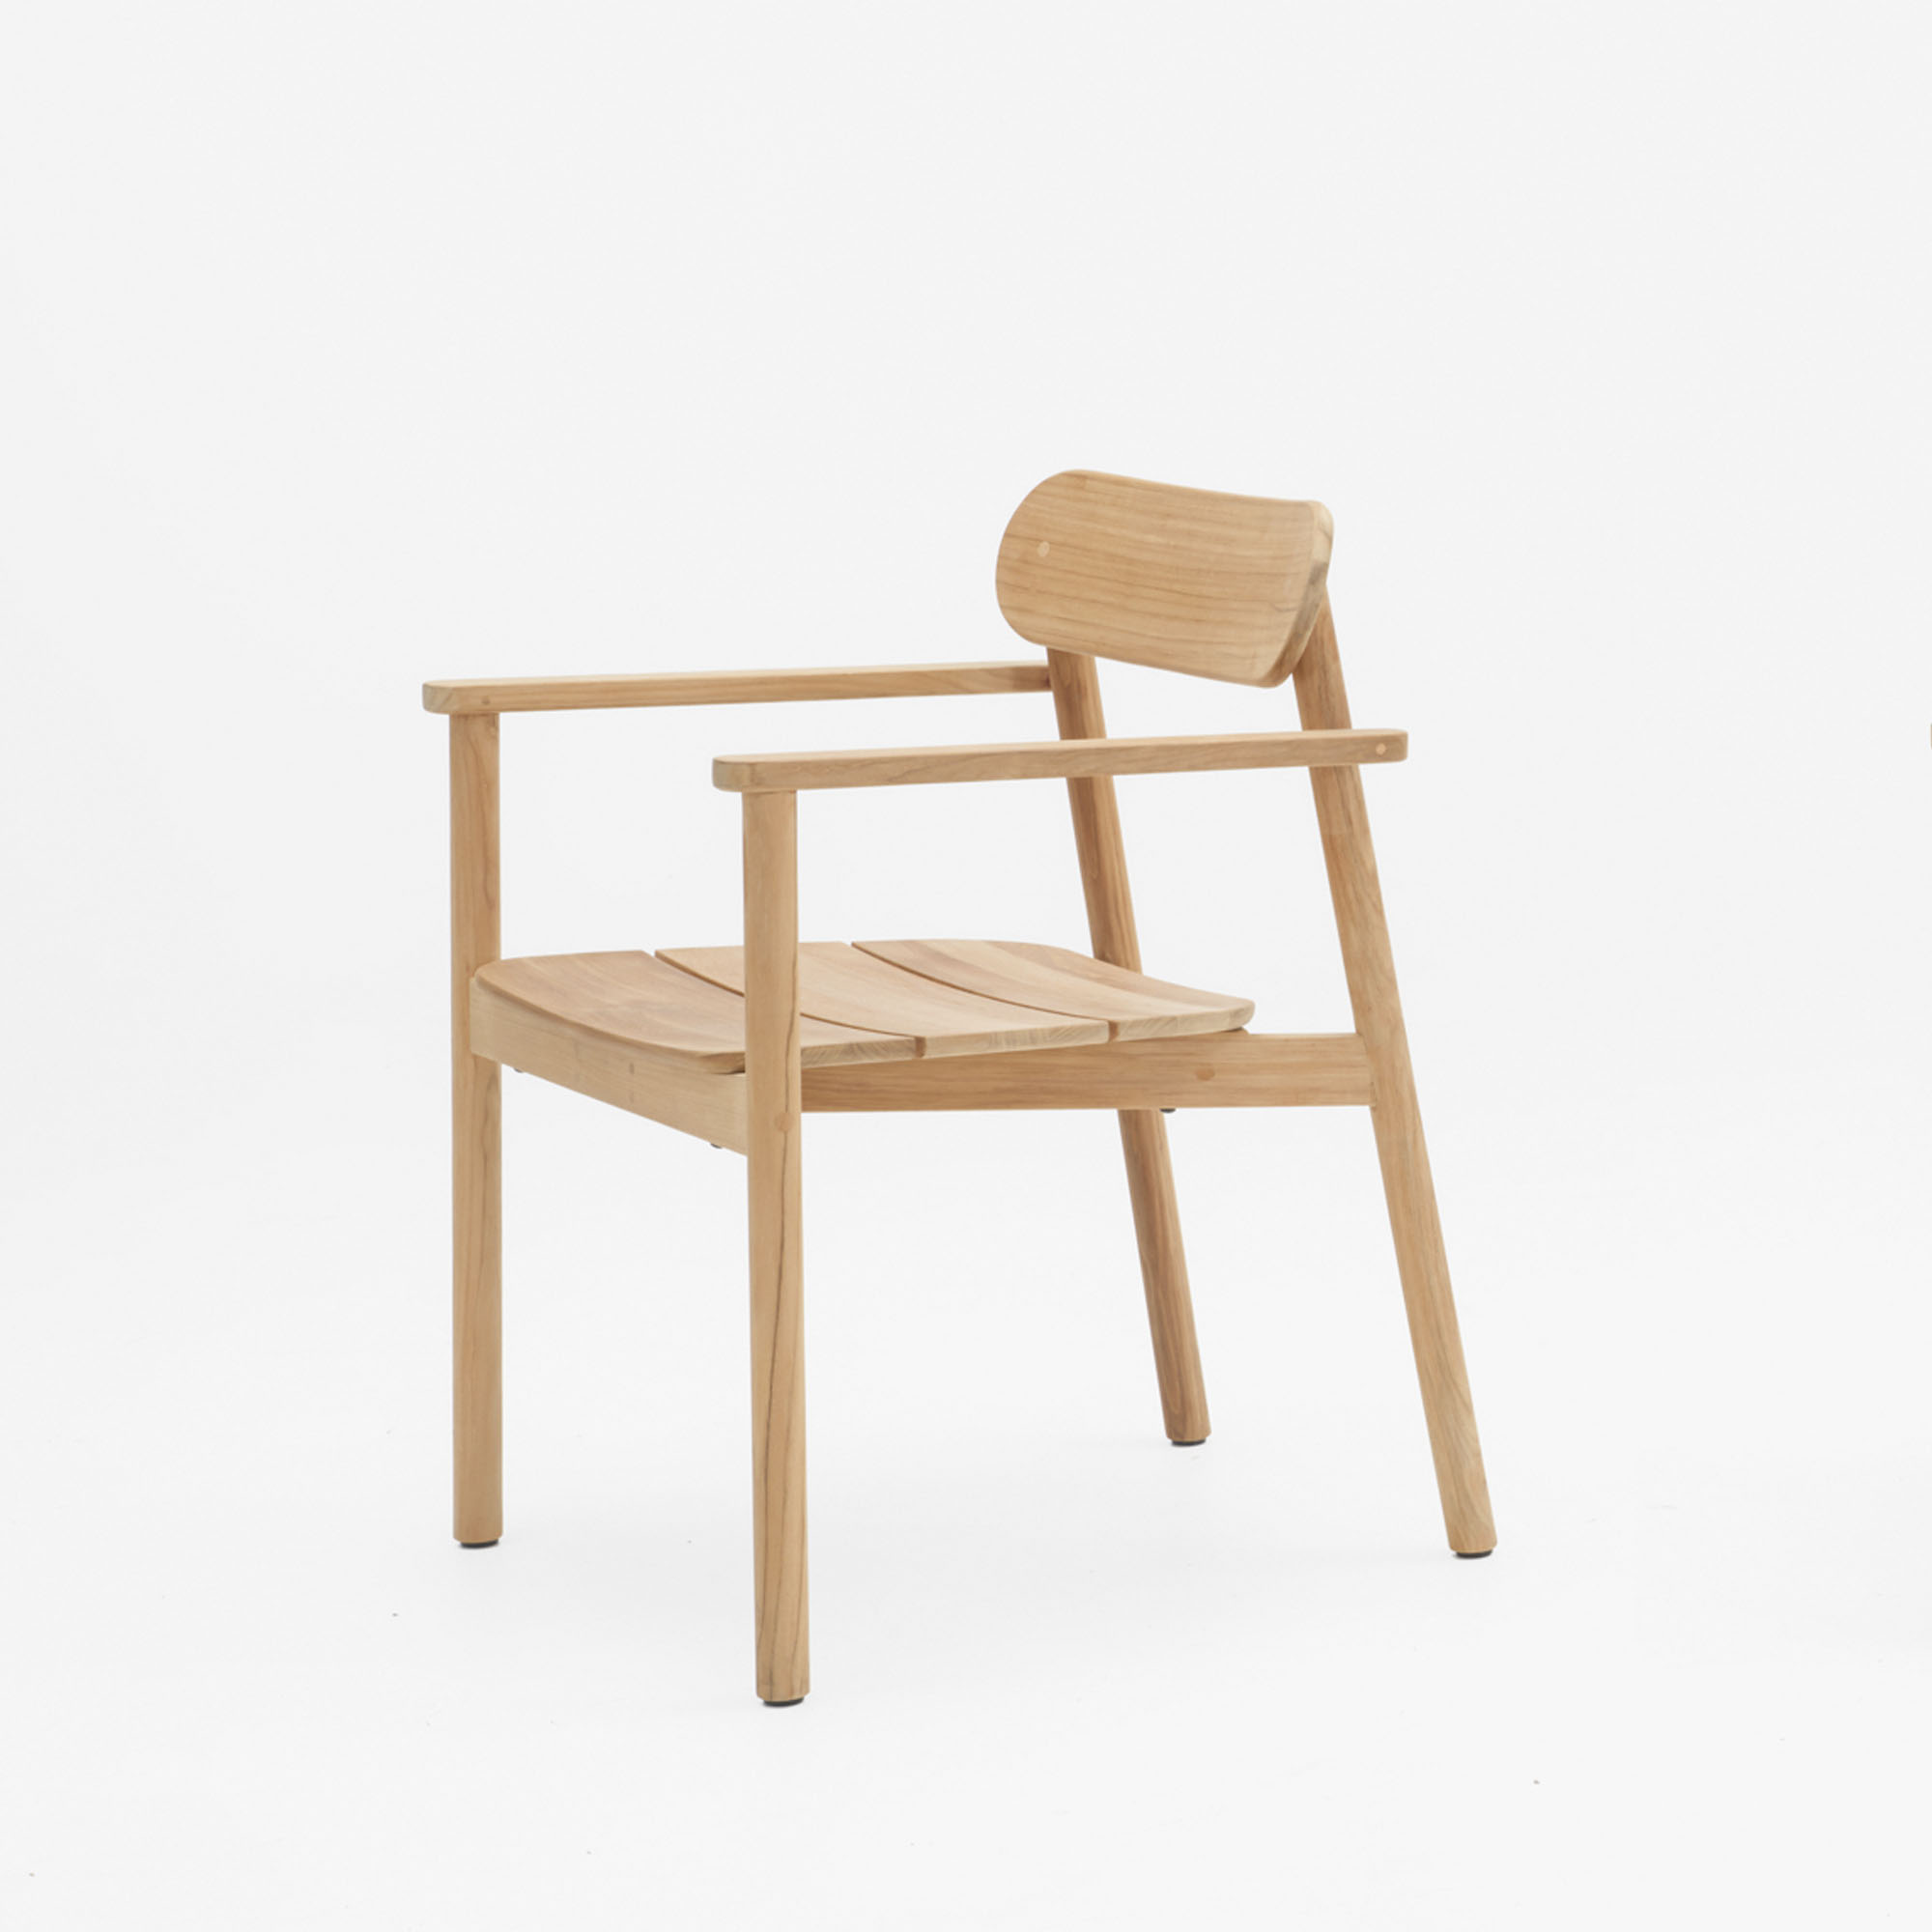 Minimalist wooden dining armchair with a clean, modern design, showcasing craftsmanship and natural warmth against a white background.